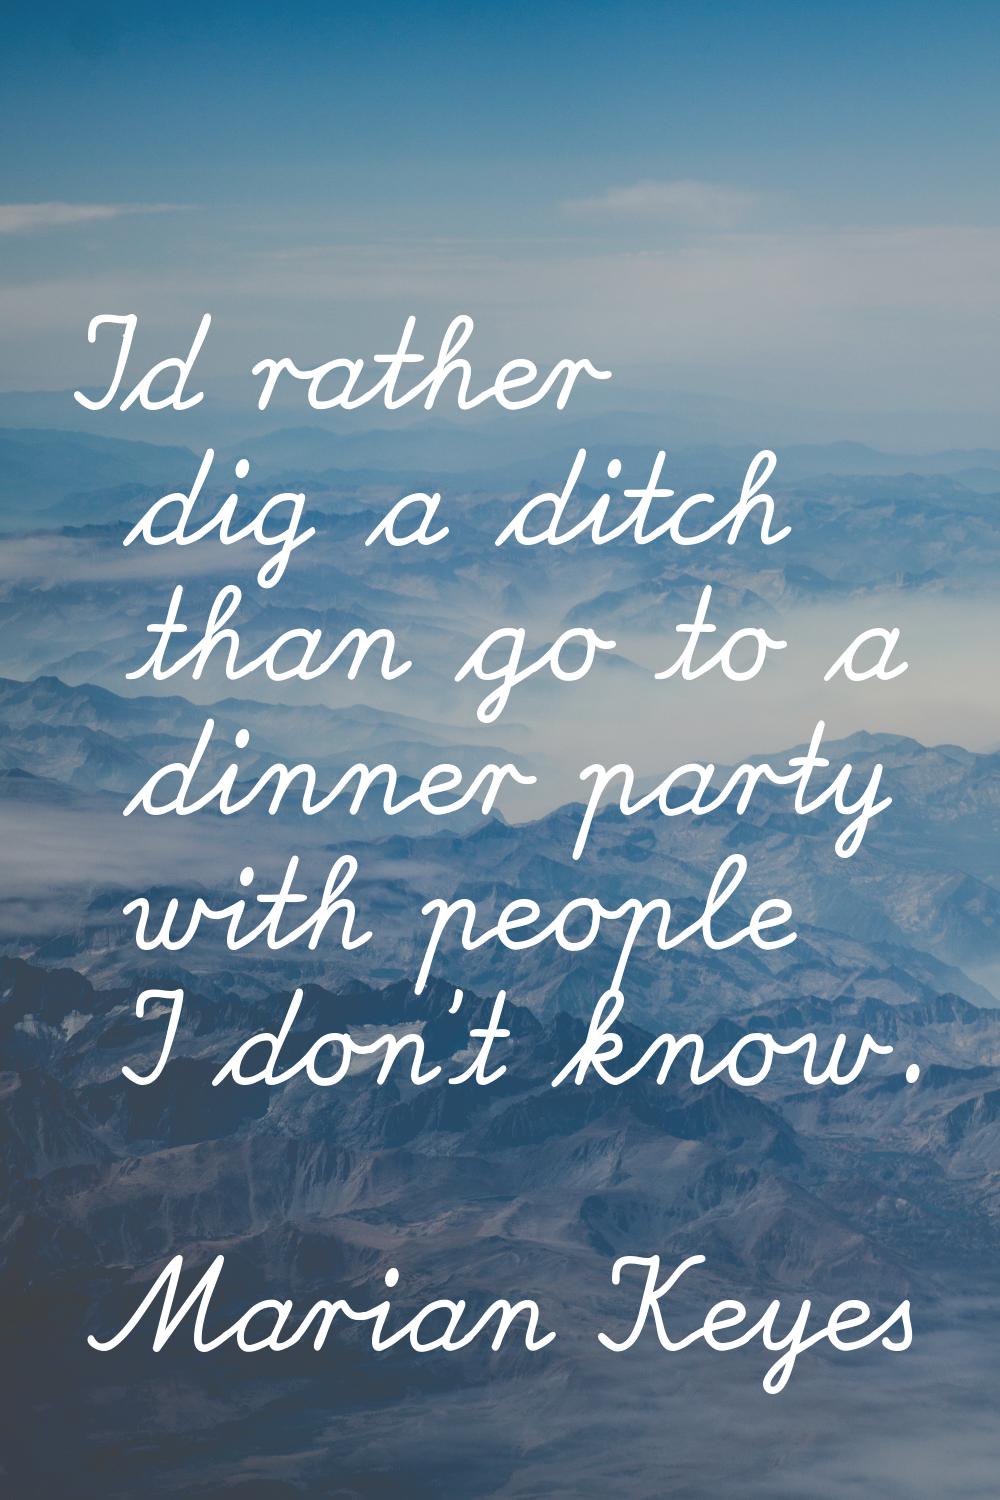 I'd rather dig a ditch than go to a dinner party with people I don't know.